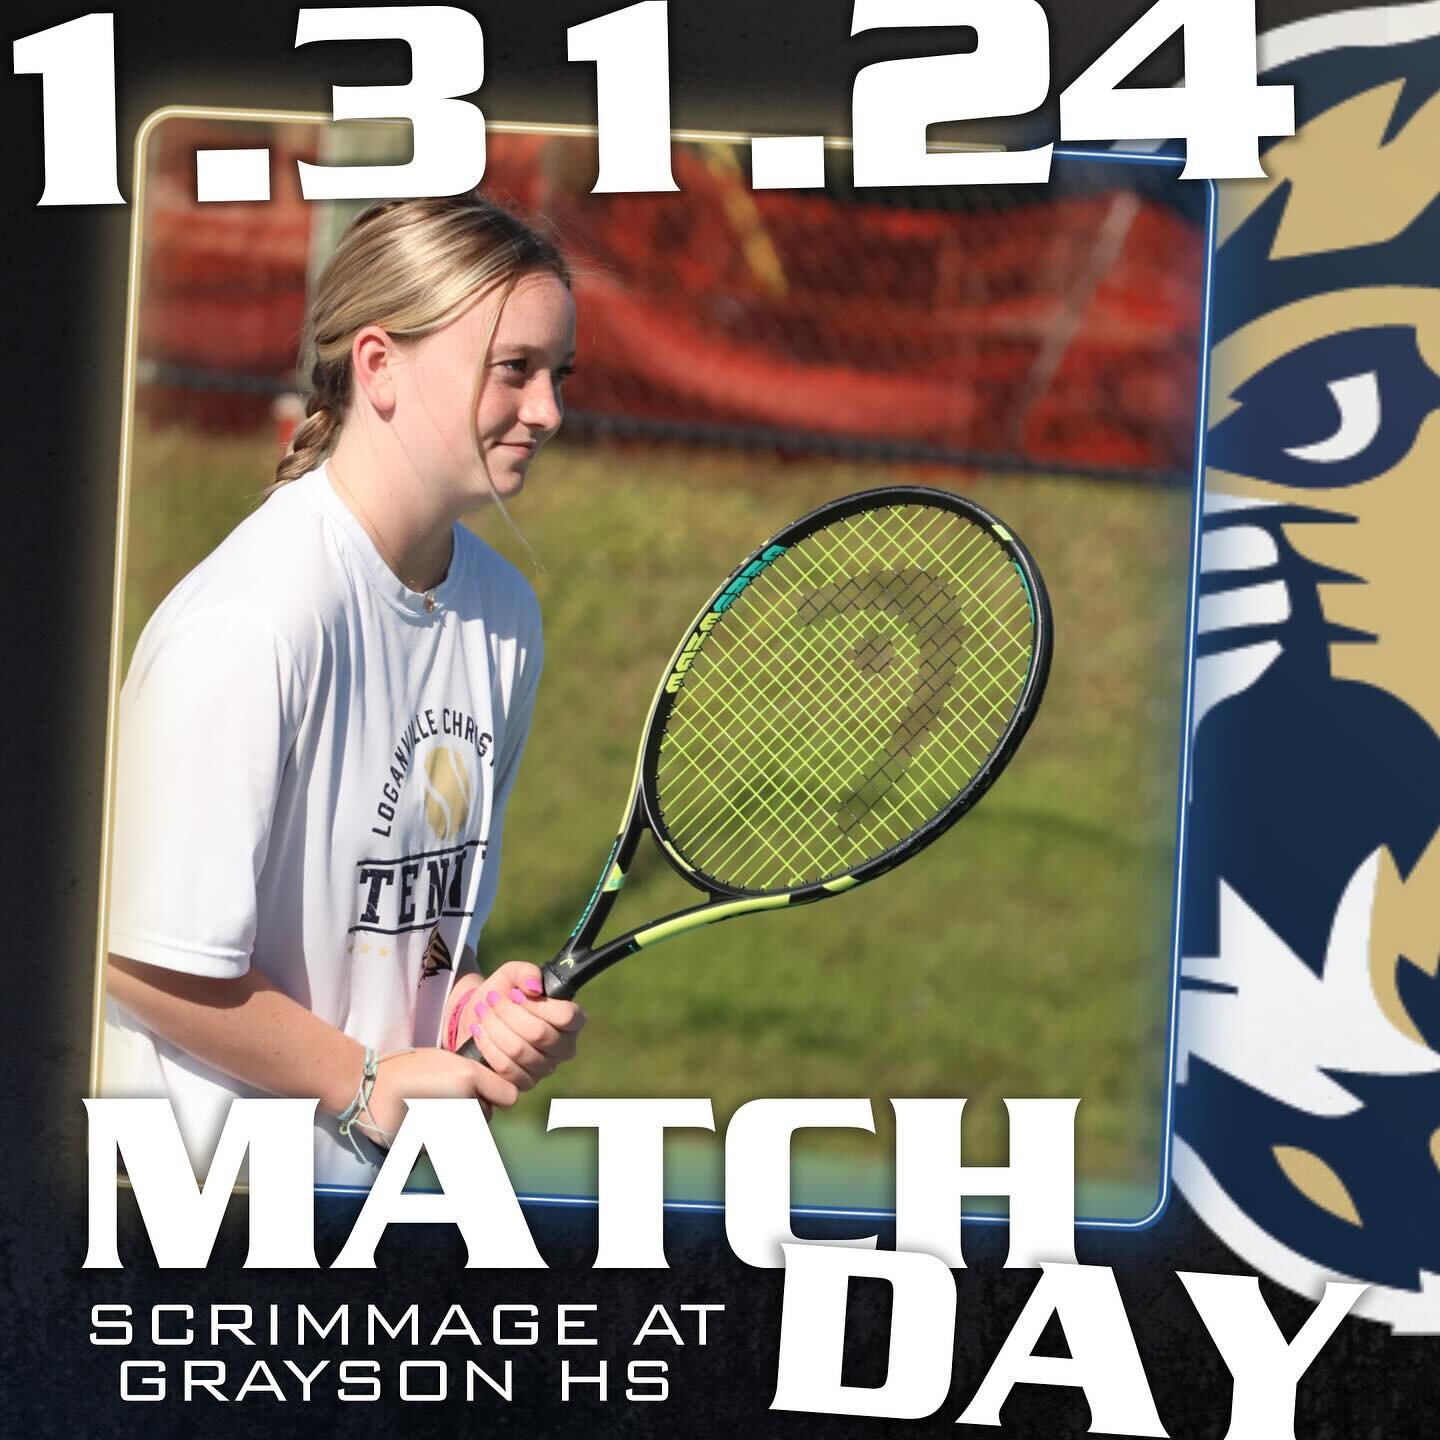 It&rsquo;s Matchday as our Tennis Athletes get their season underway with a scrimmage today at Grayson HS!